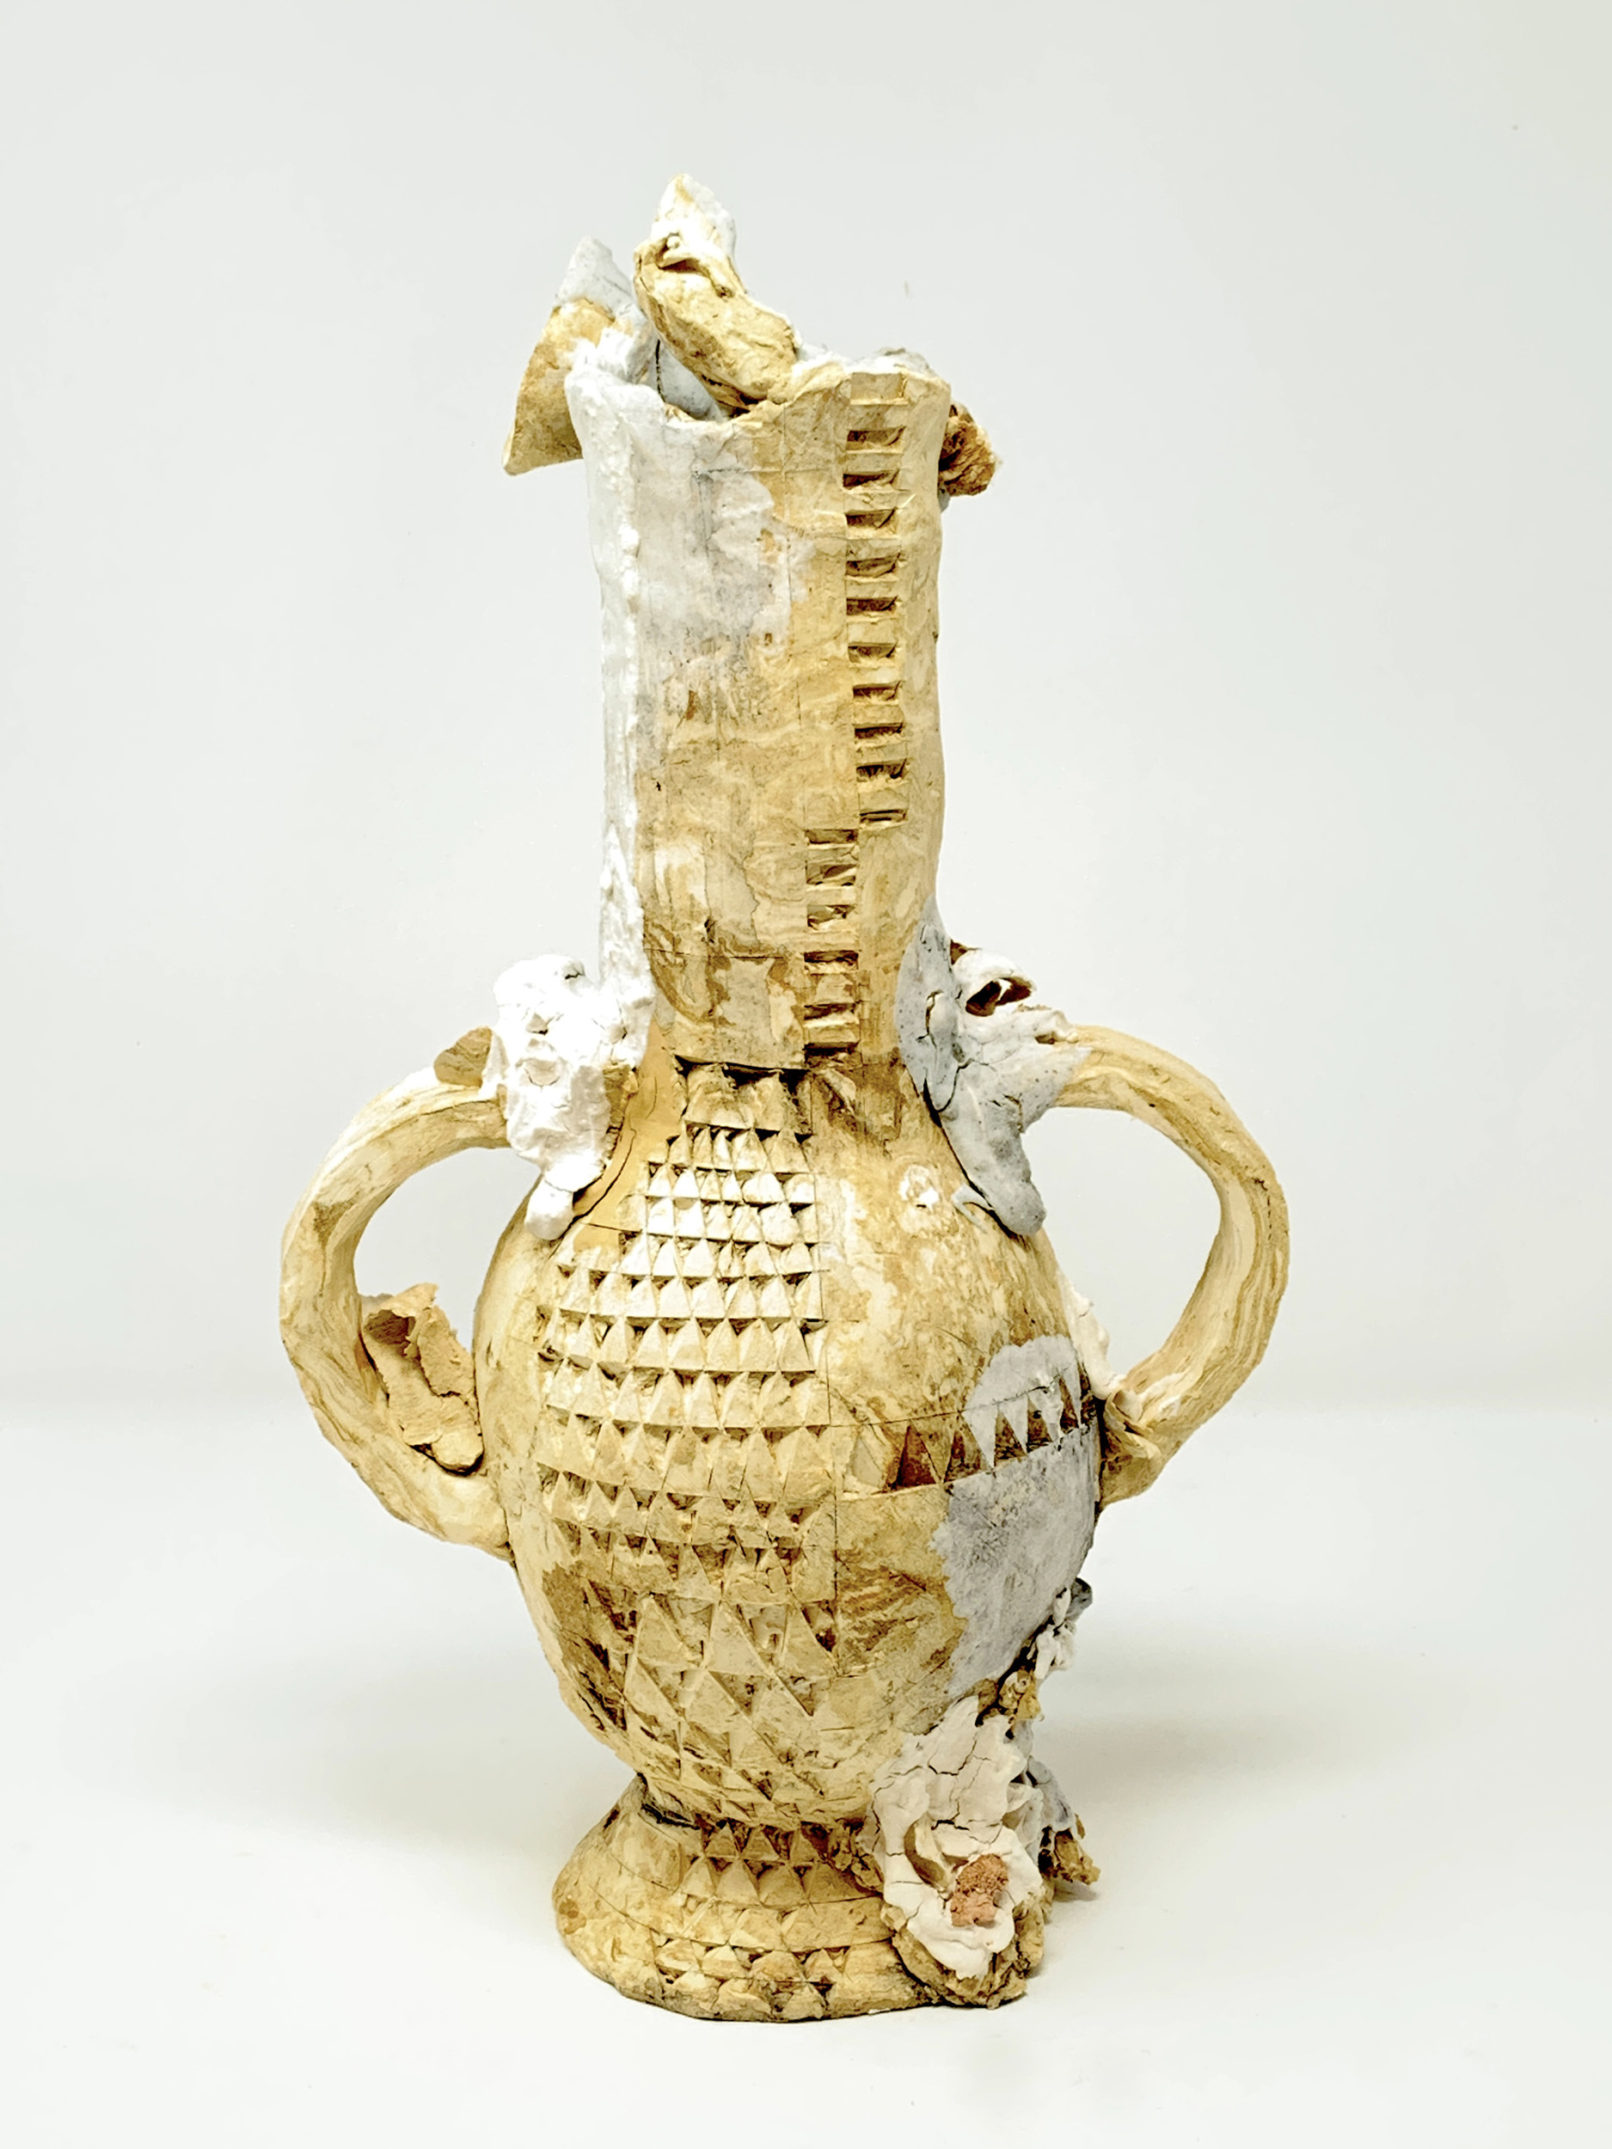 Ceramic vessel from Endangered Vessel series by artist Patricia Sannit